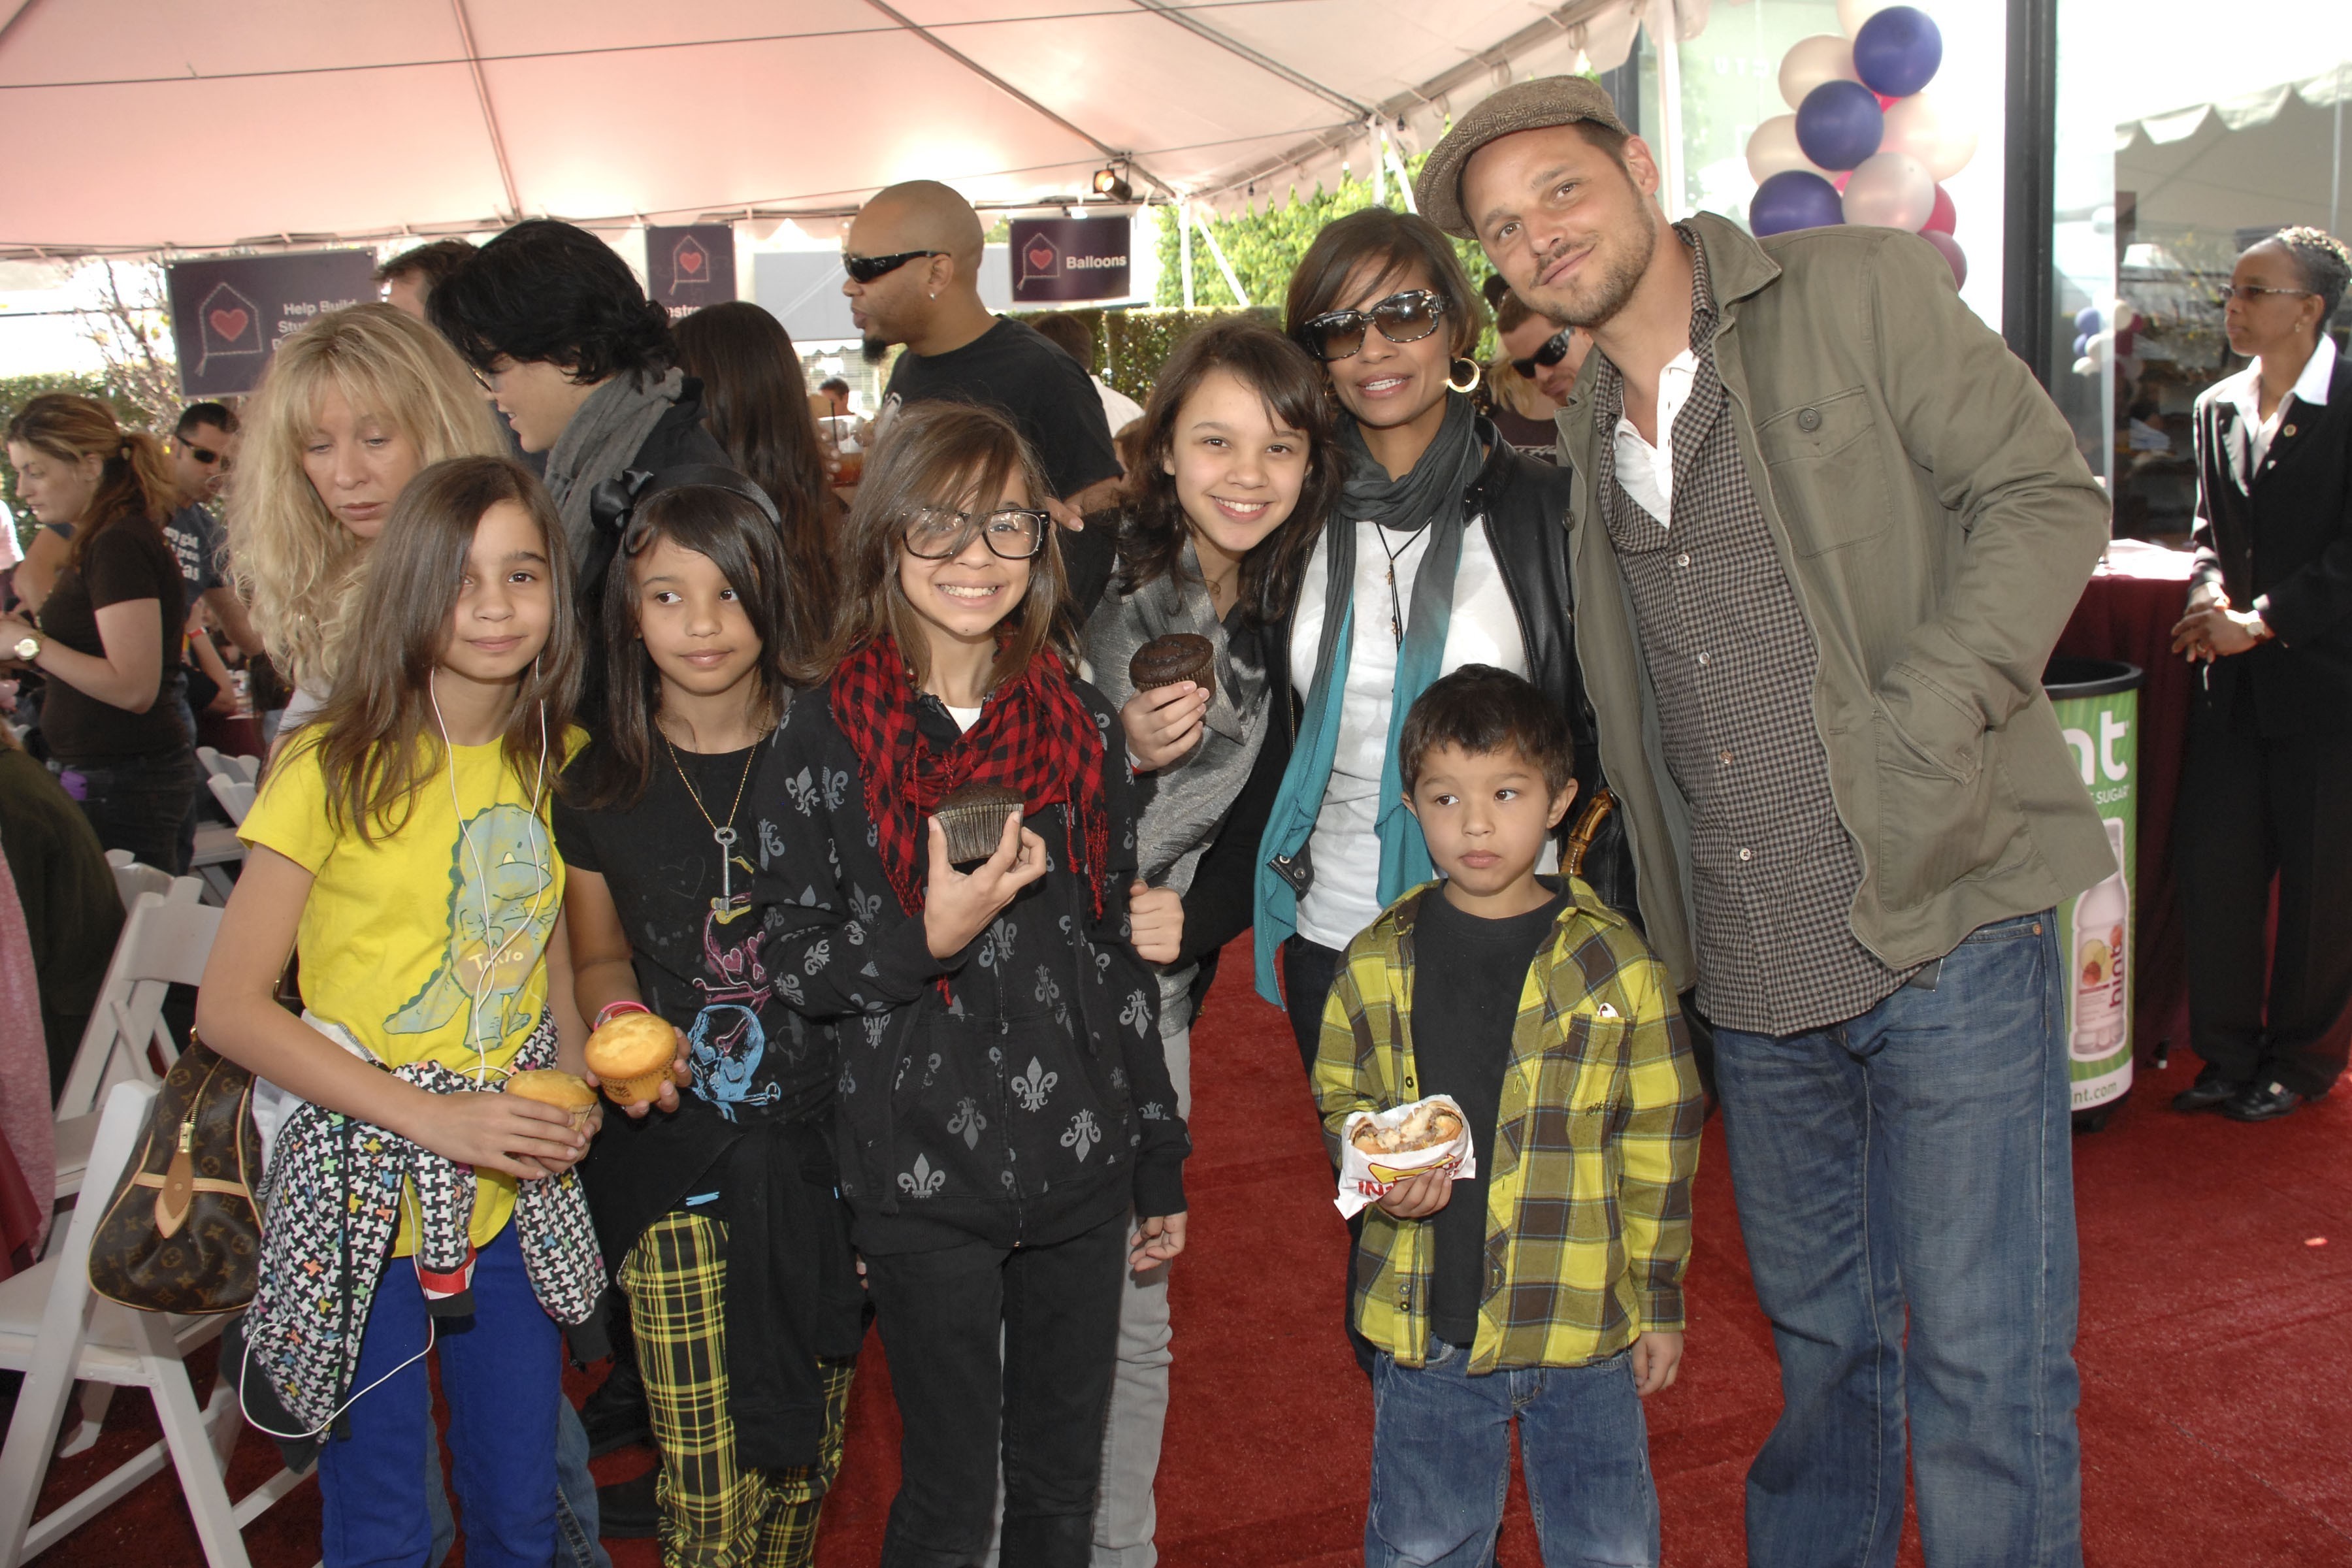 (L-R) Maya Chambers, Kaila Chambers, Eva Chambers, Isabella Chambers, Keisha Chambers, Jackson Chambers and Justin Chambers attend the 7th ANNUAL STUART HOUSE BENEFIT at John Varvatos, on March 8, 2009 in Los Angeles, California. | Source: Getty Images